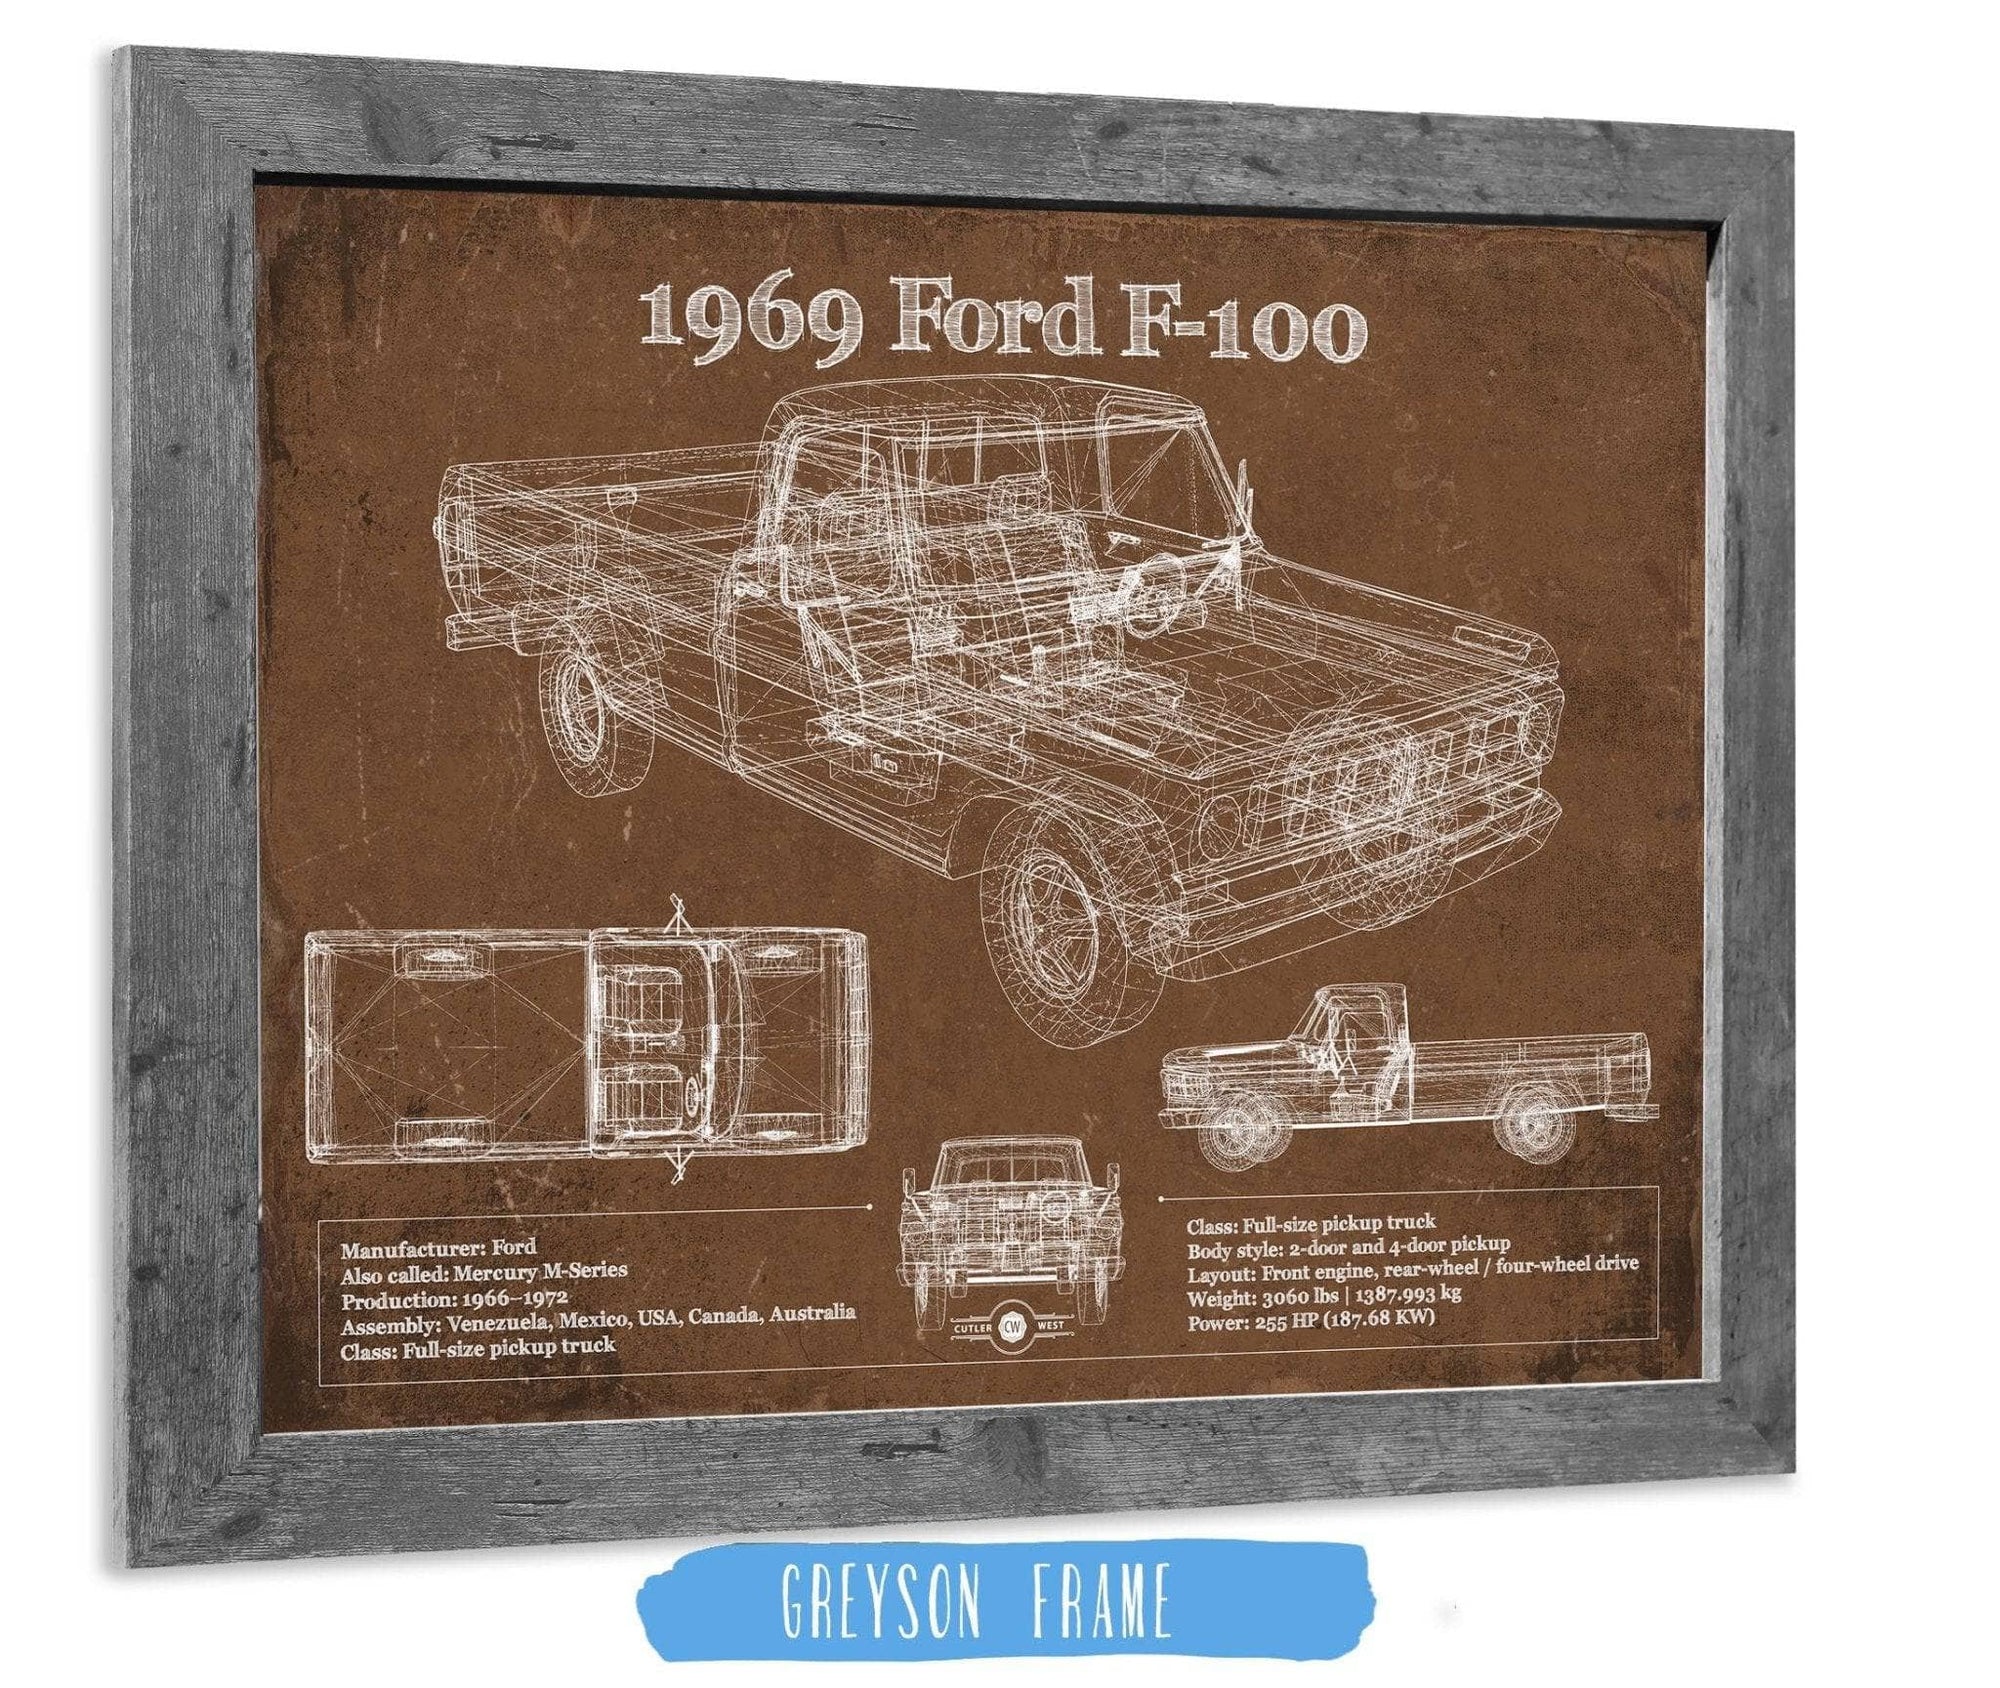 Cutler West Ford Collection 14" x 11" / Greyson Frame 1969 Ford F-100 Pickup Vintage Blueprint Auto Print 933311135_42144